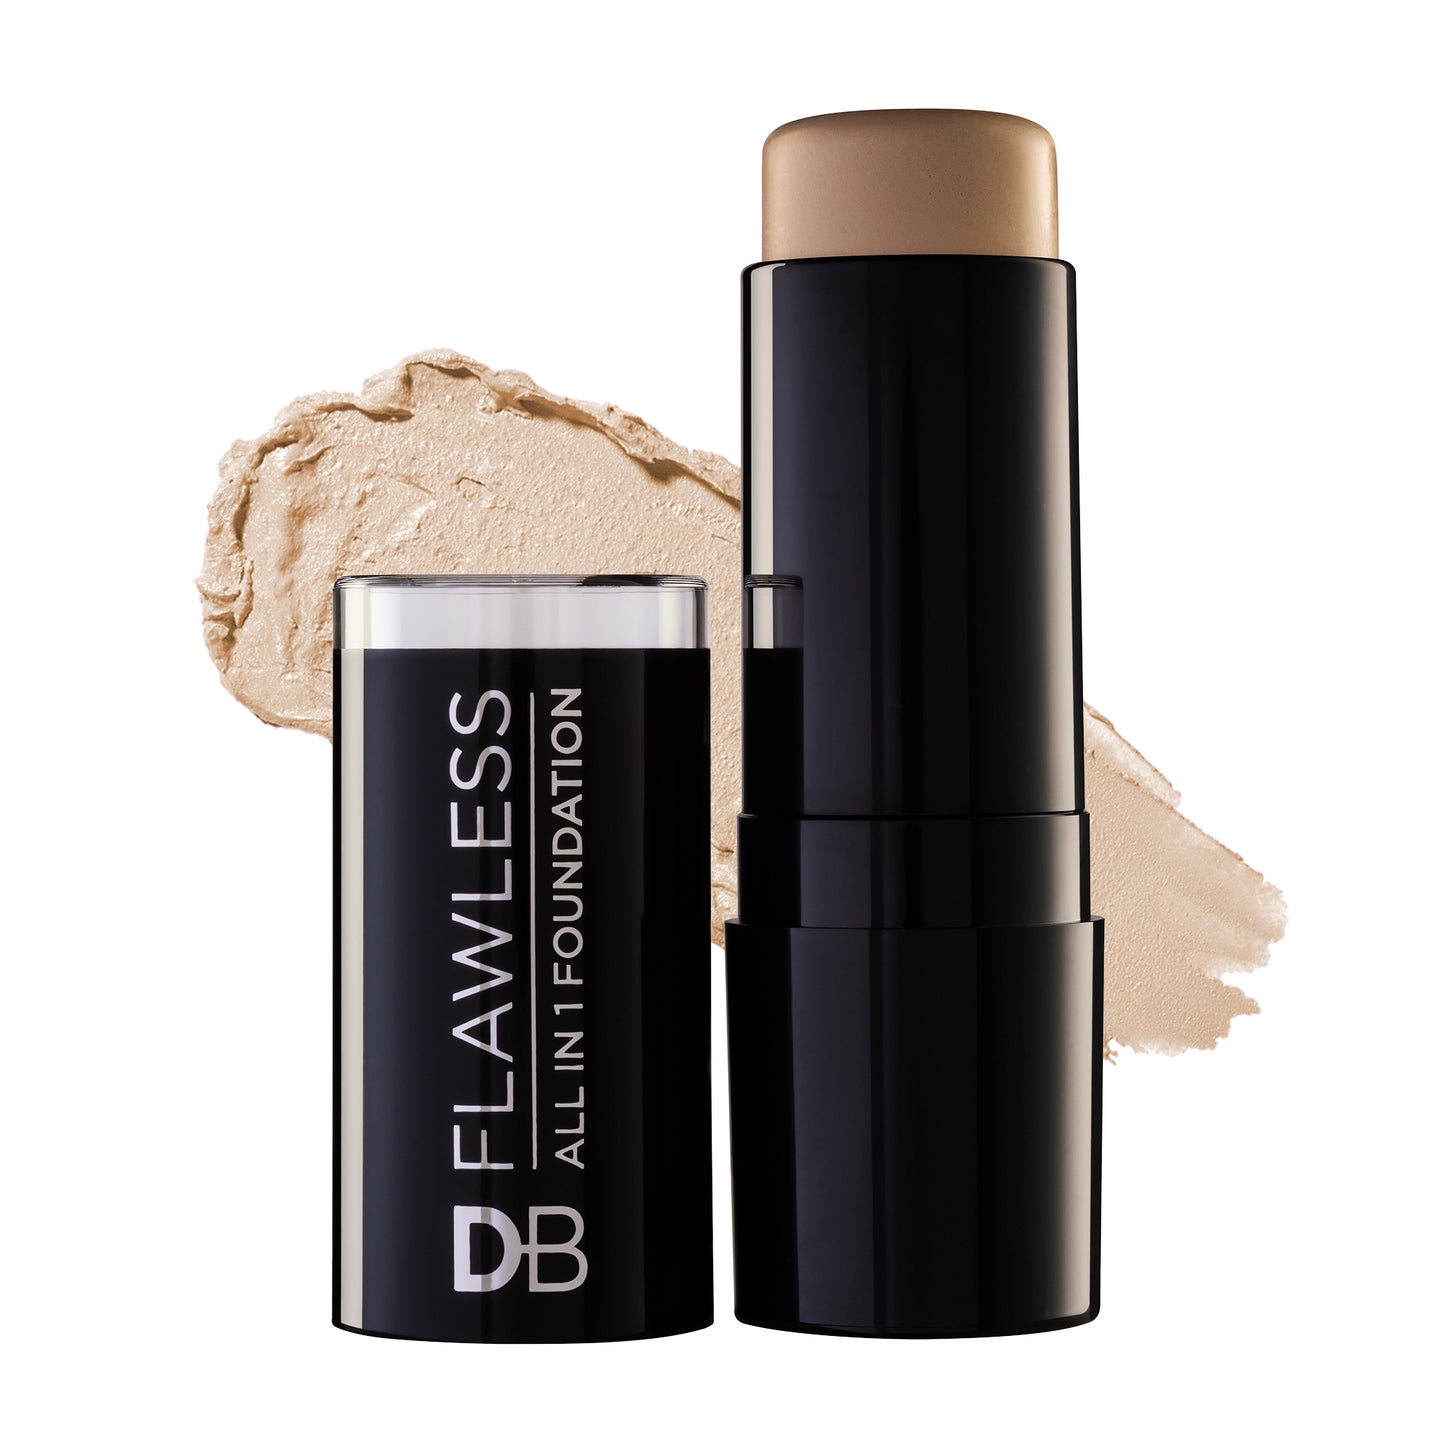 Flawless All in One Foundation (Porcelain Ivory) | DB Cosmetics